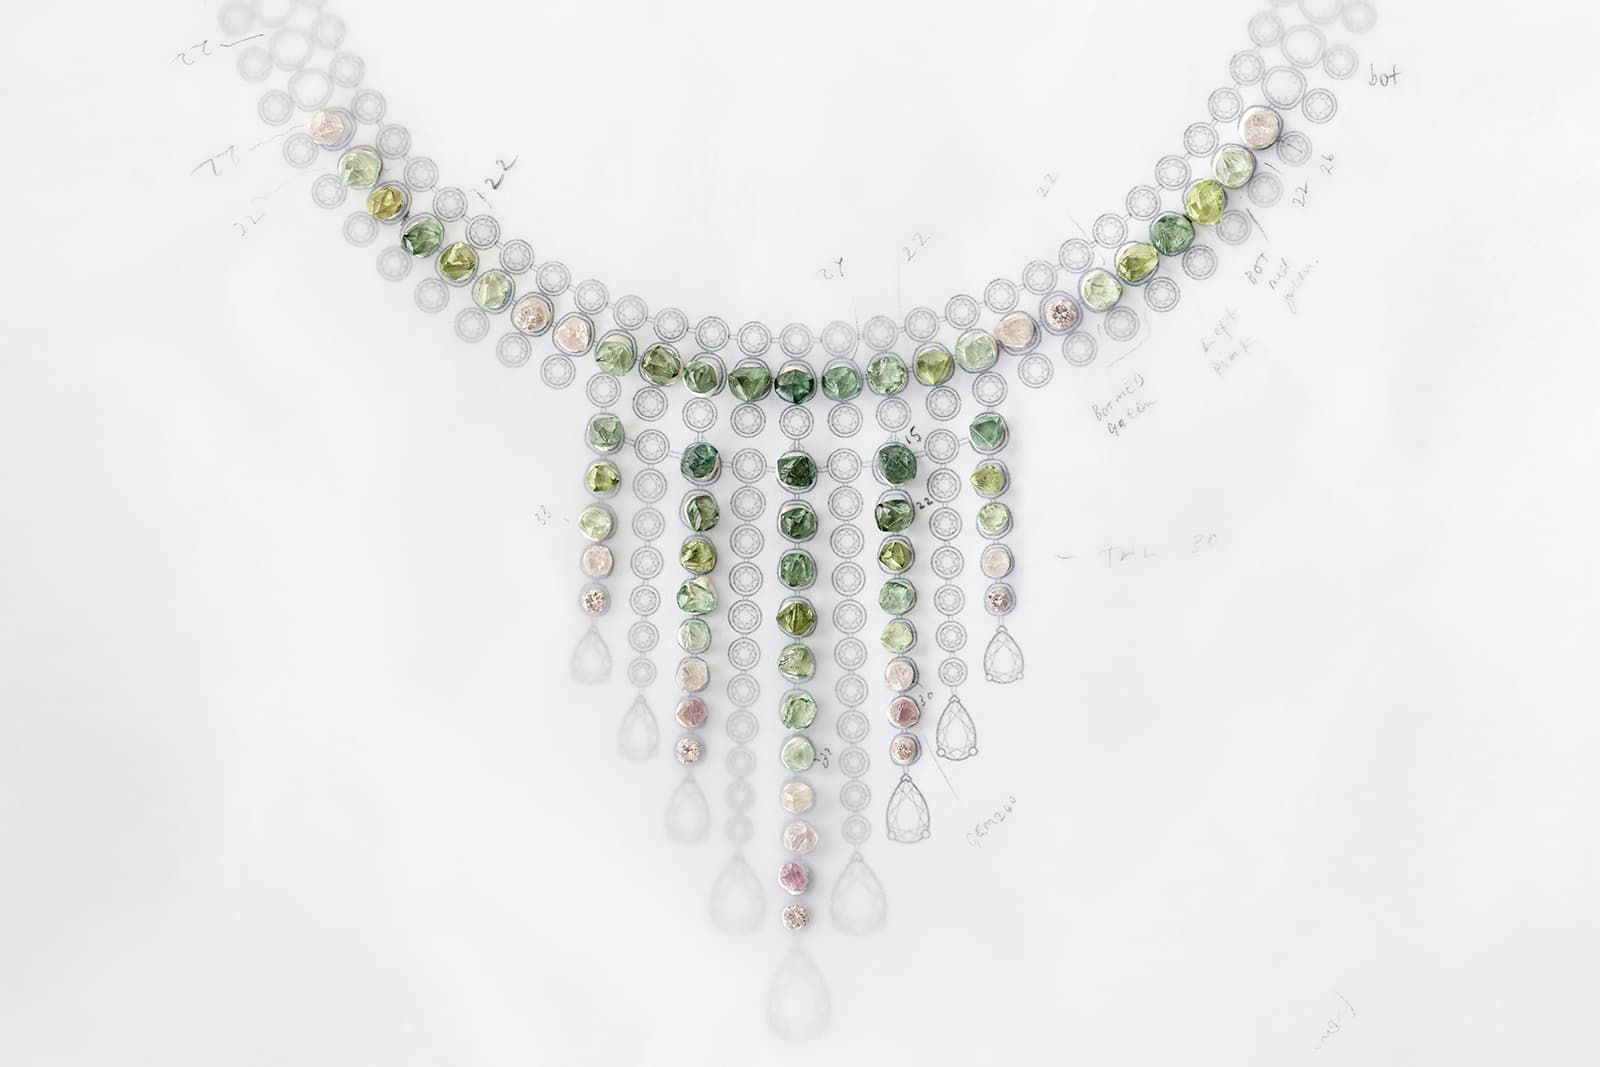 De Beers Reflections of Nature High Jewelry Is INspired by – Robb Report